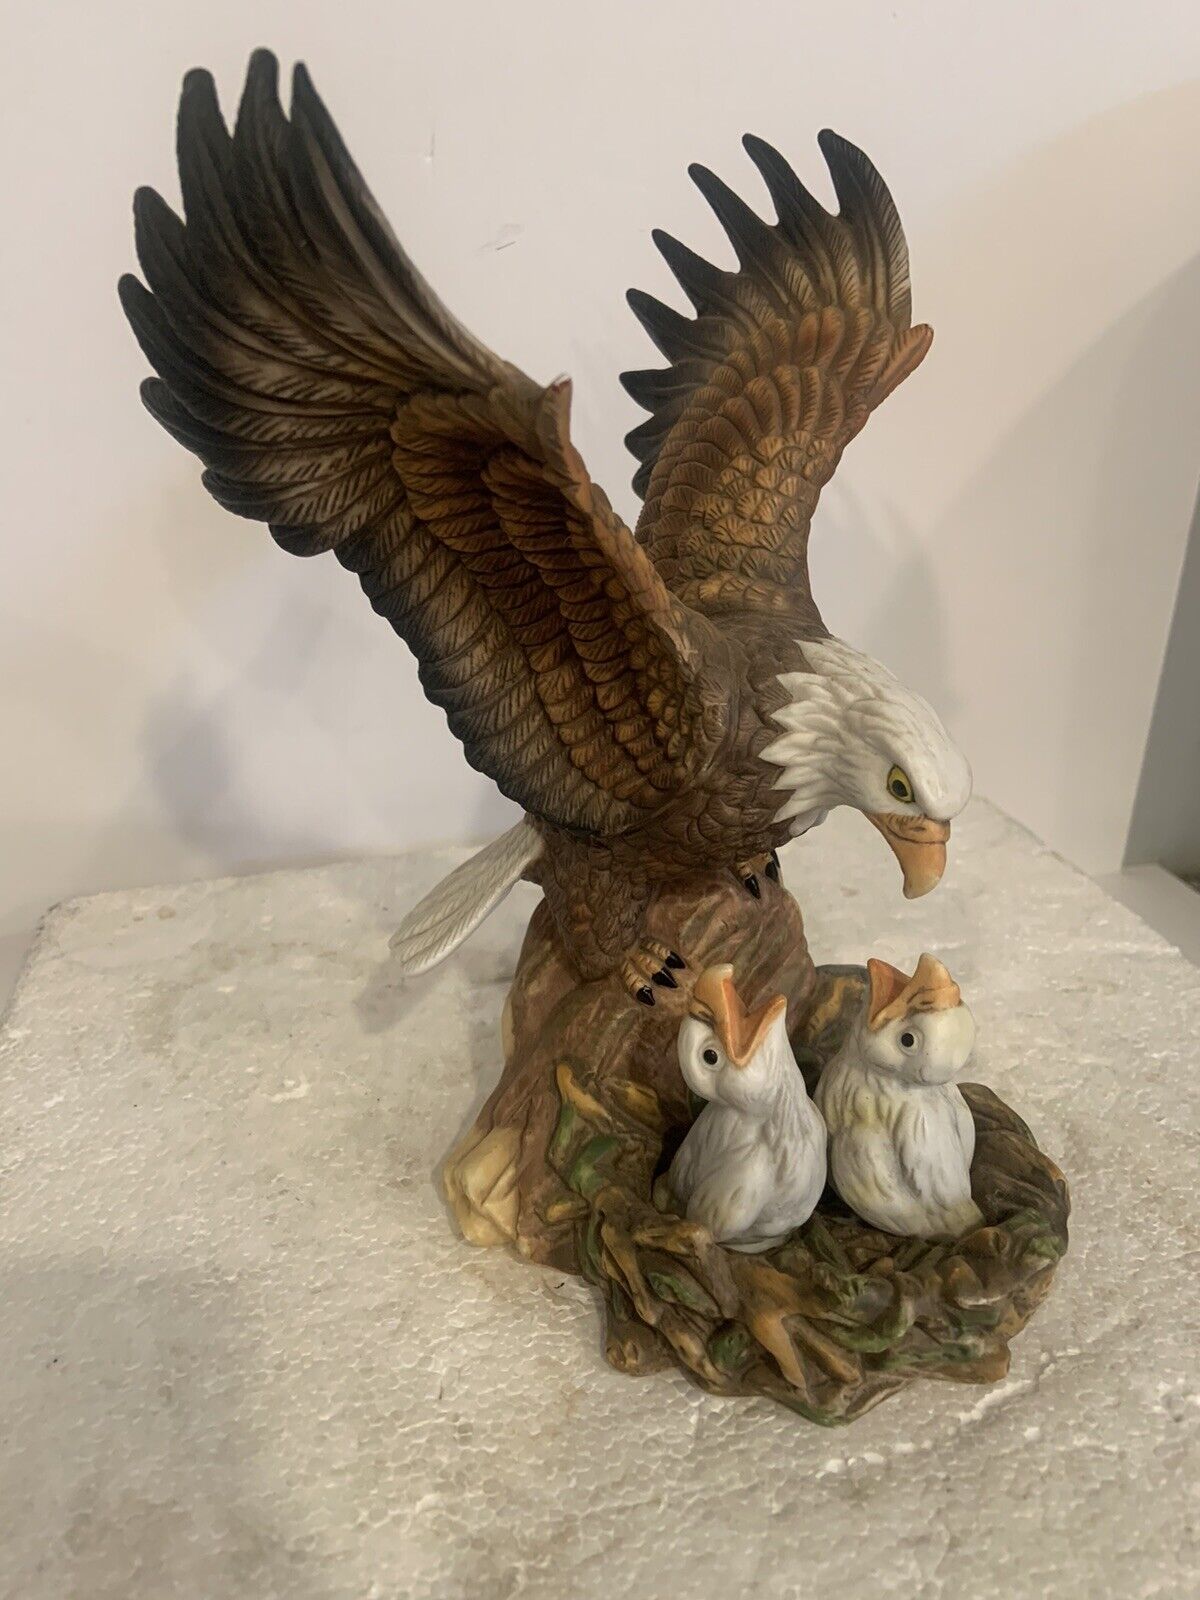 Vntg Bald Eagle Figurine With 2 Babies In Nest 5.5” Wing Span RARE See Photos